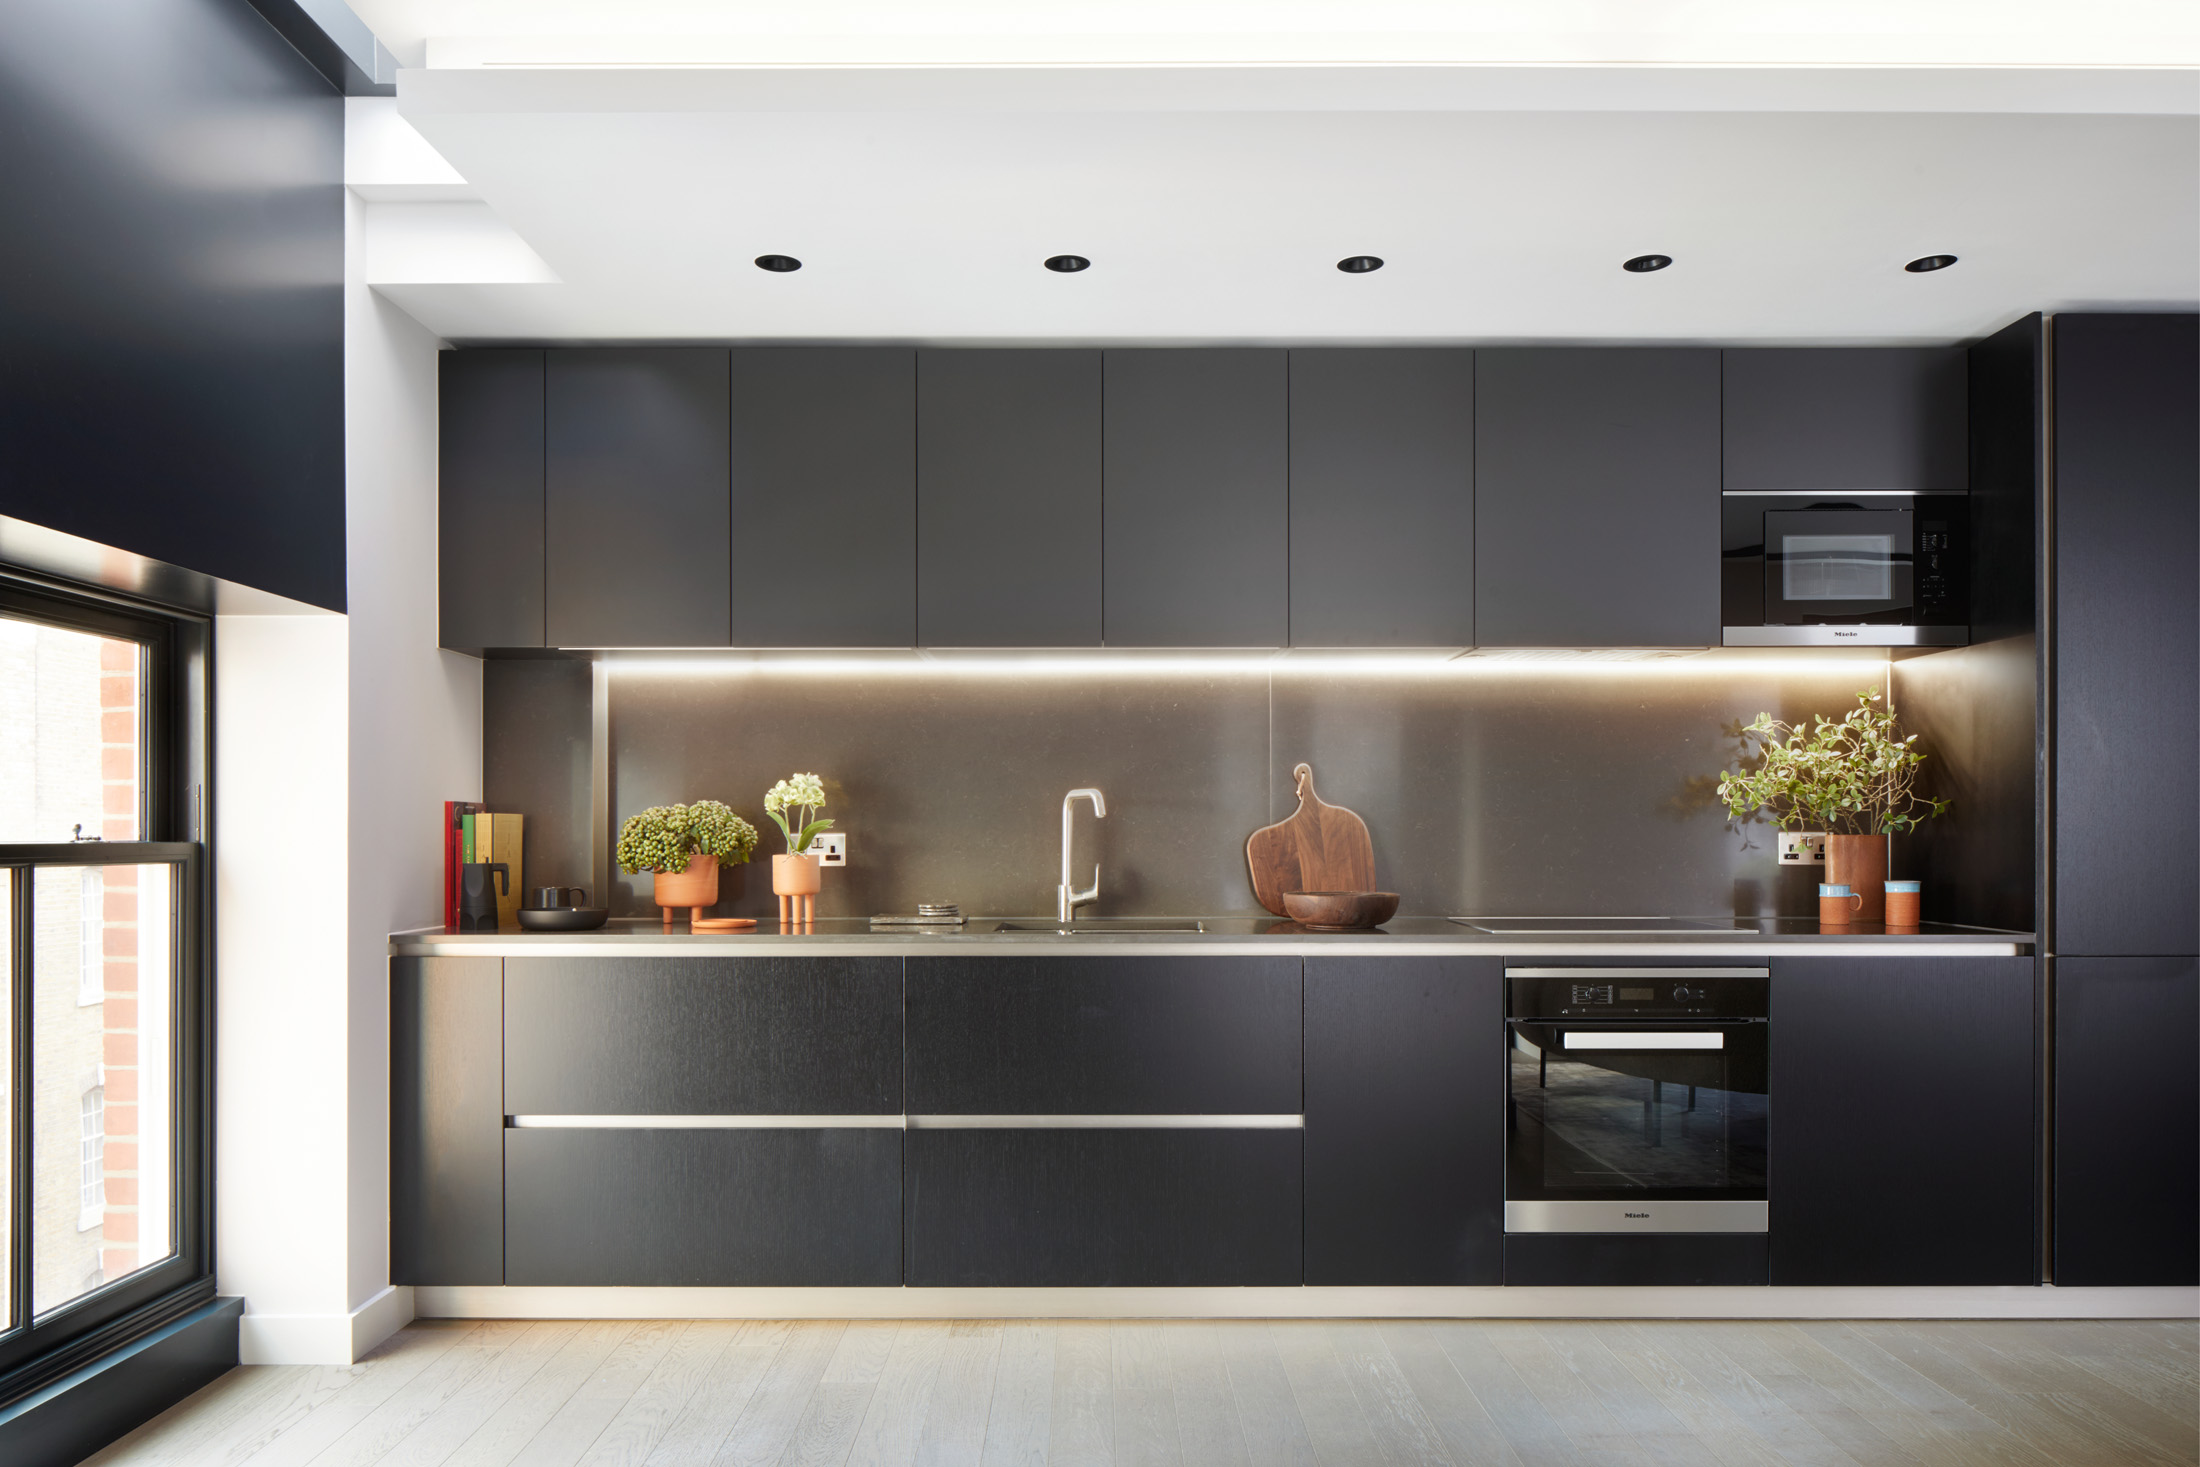 For Sale: Parker Street Chapter House Covent Garden WC2 luxury kitchen with black units